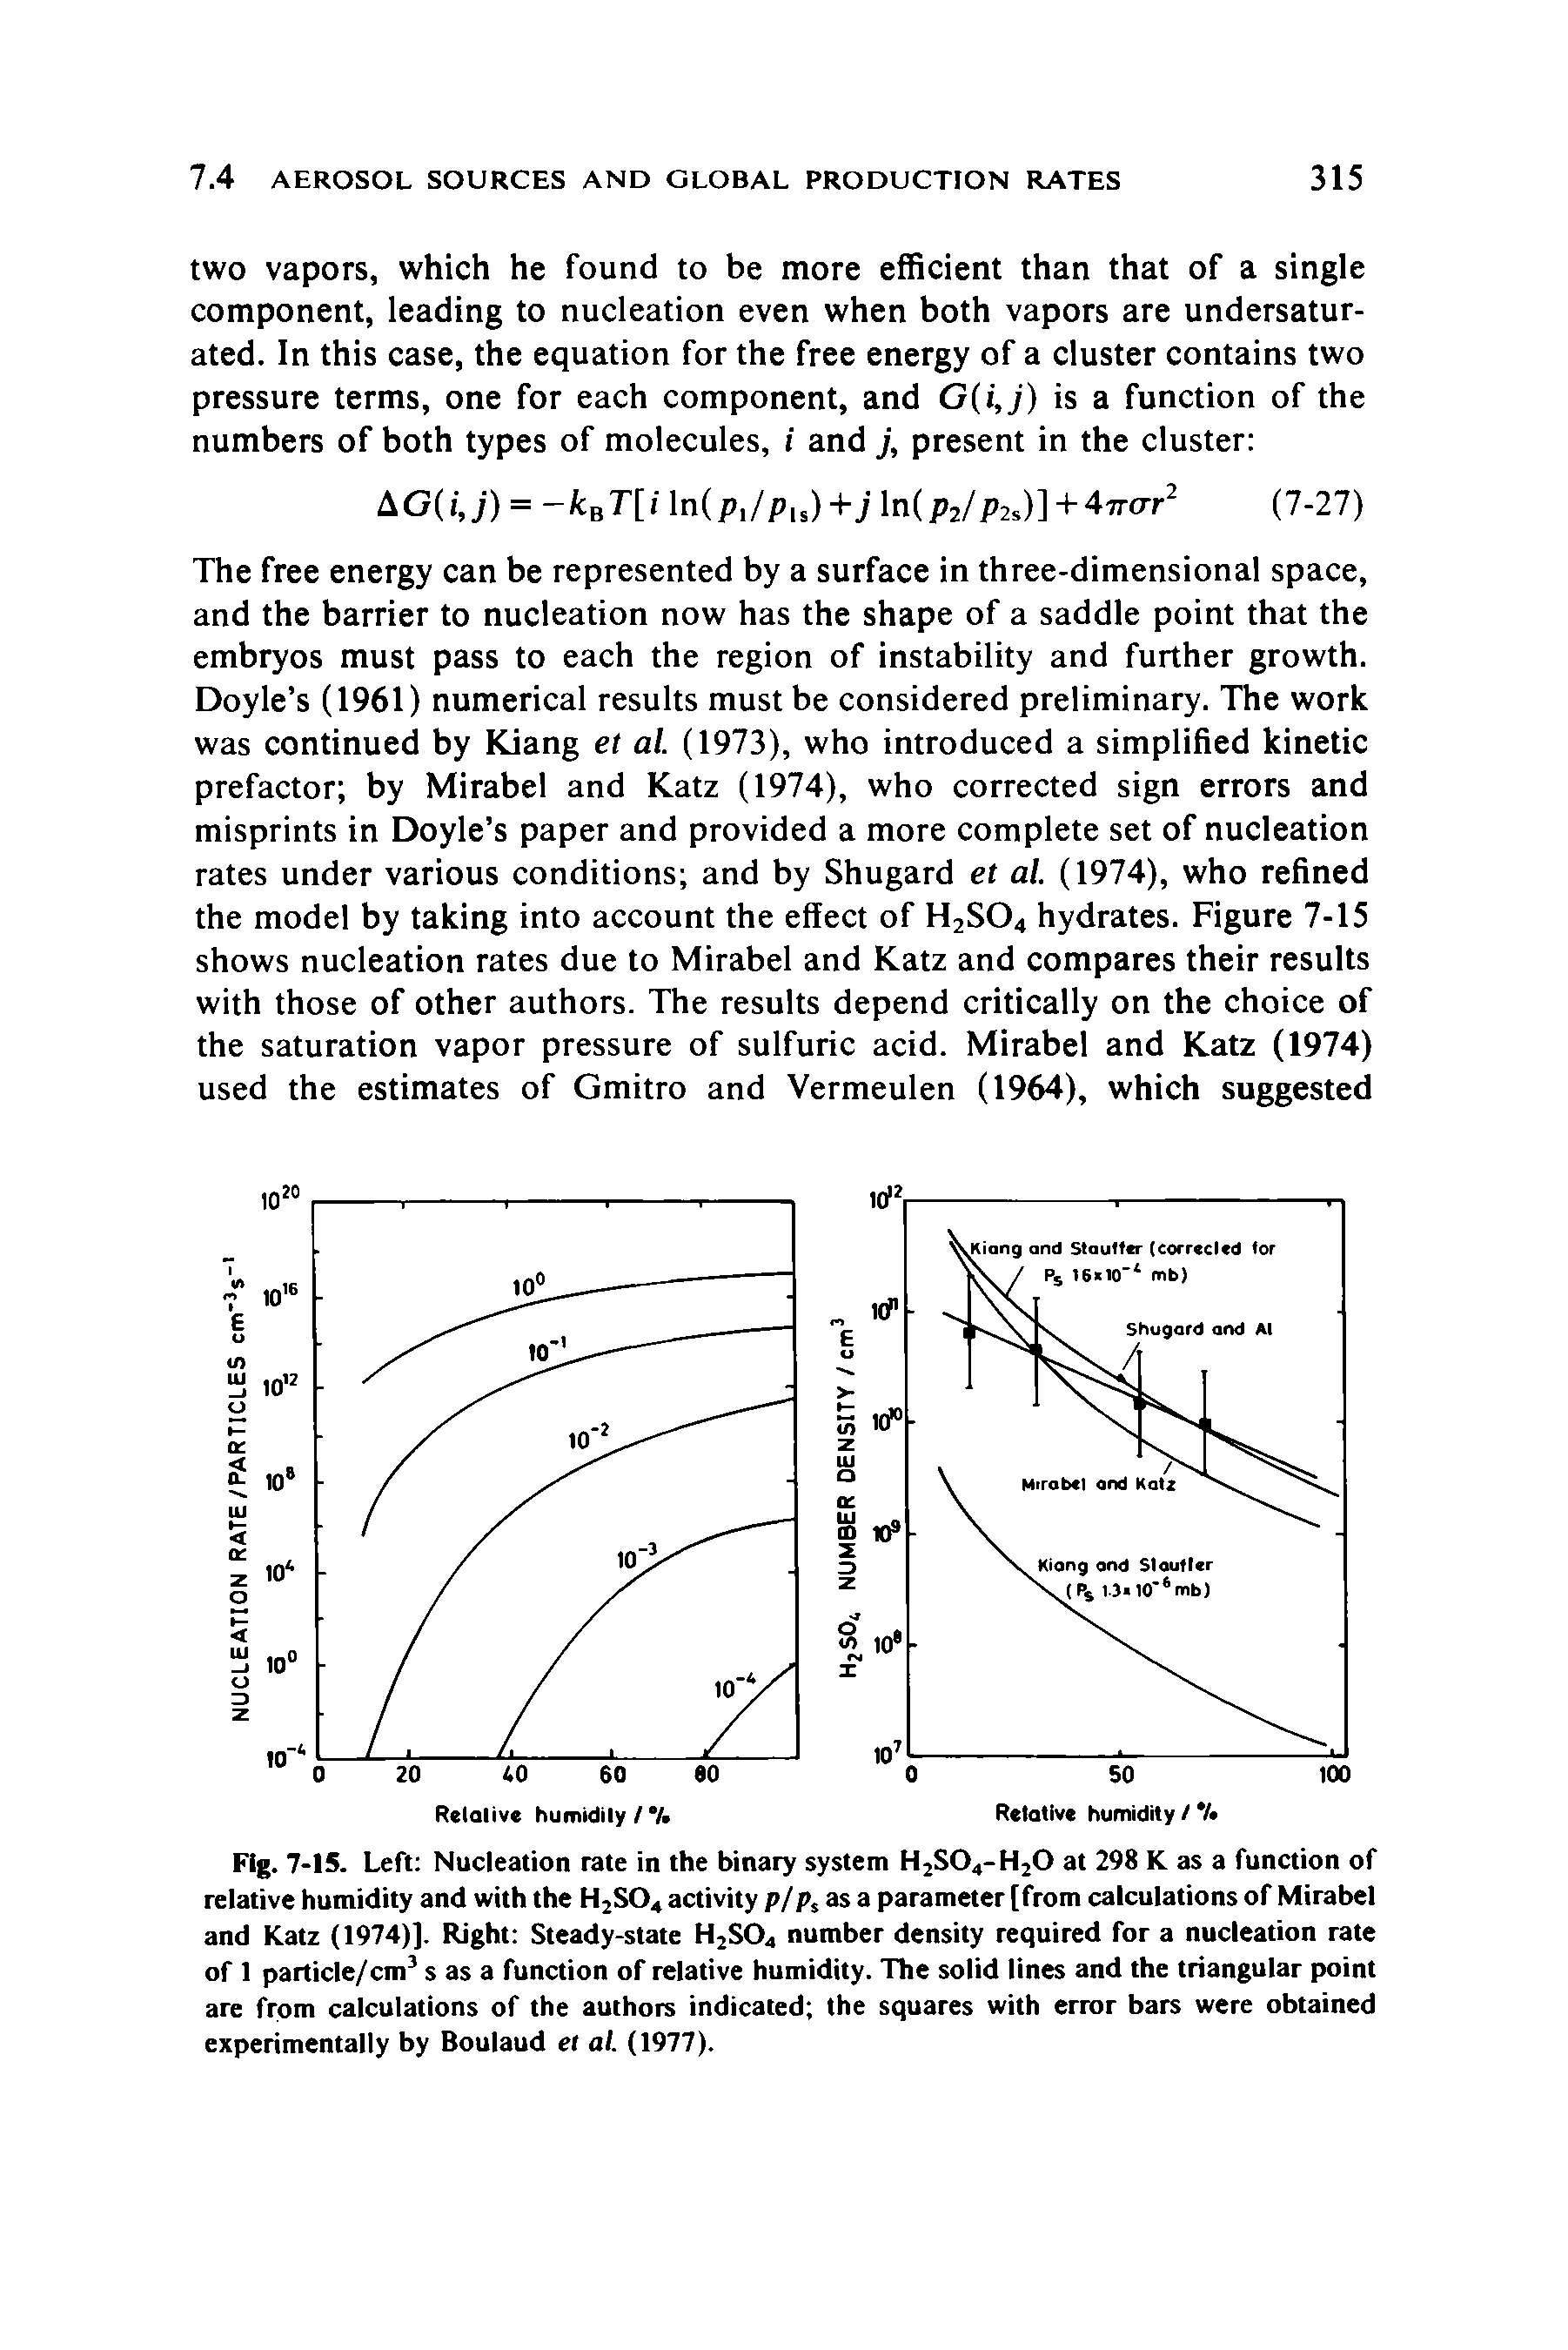 Fig. 7-15. Left Nucleation rate in the binary system H2S04-H20 at 298 K as a function of relative humidity and with the H2S04 activity p/ps as a parameter [from calculations of Mirabel and Katz (1974)]. Right Steady-state H2S04 number density required for a nucleation rate of 1 particle/cm3 s as a function of relative humidity. The solid lines and the triangular point are from calculations of the authors indicated the squares with error bars were obtained experimentally by Boulaud et al. (1977).